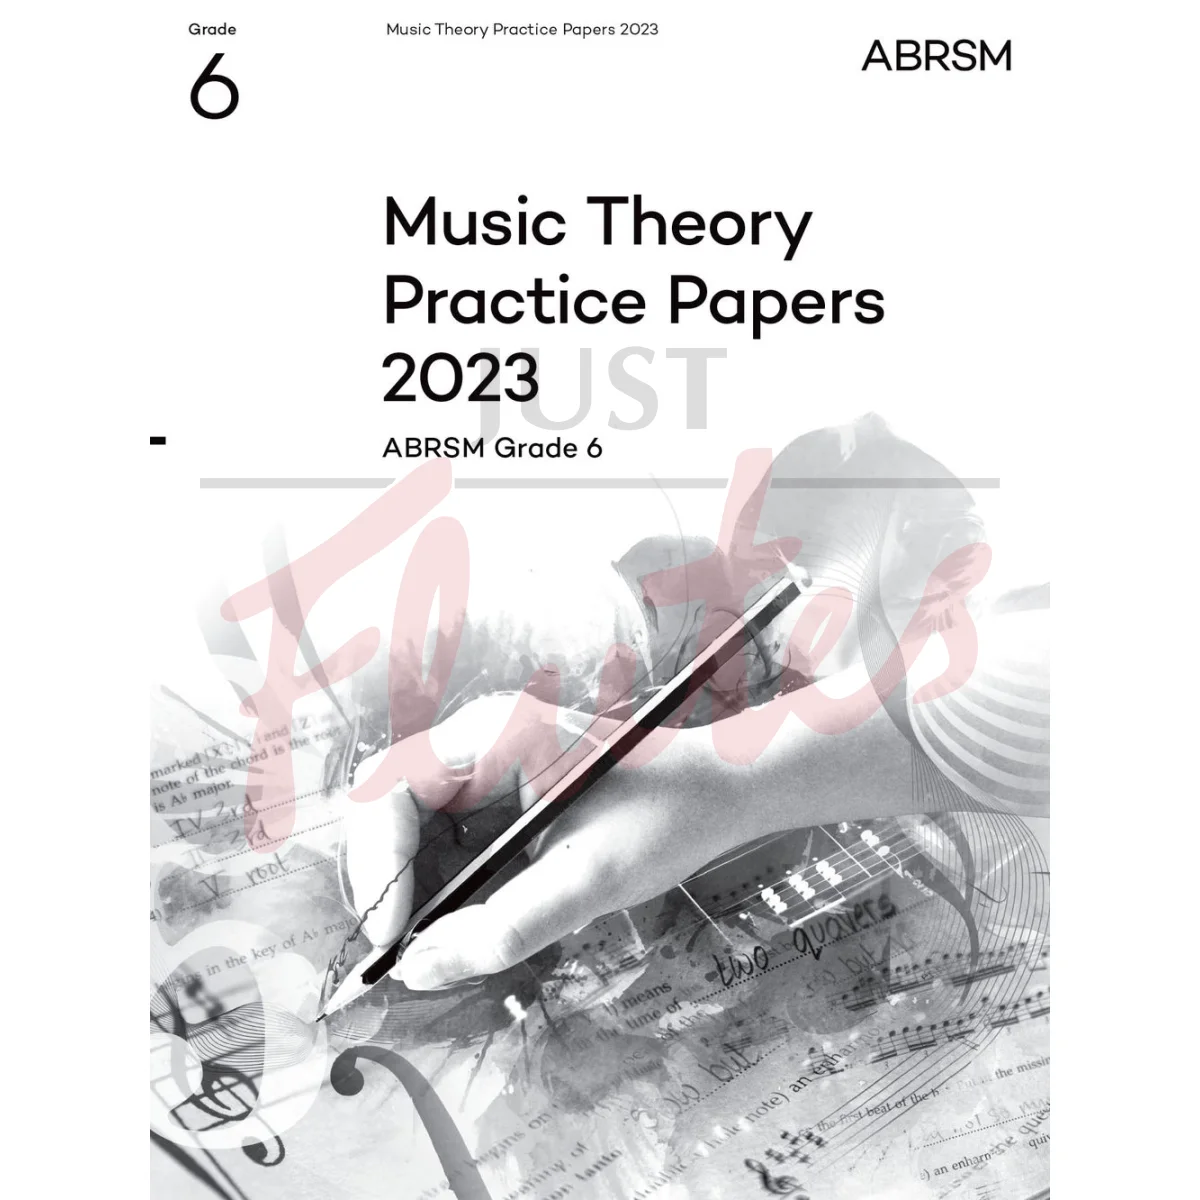 Music Theory Practice Papers 2023 Grade 6